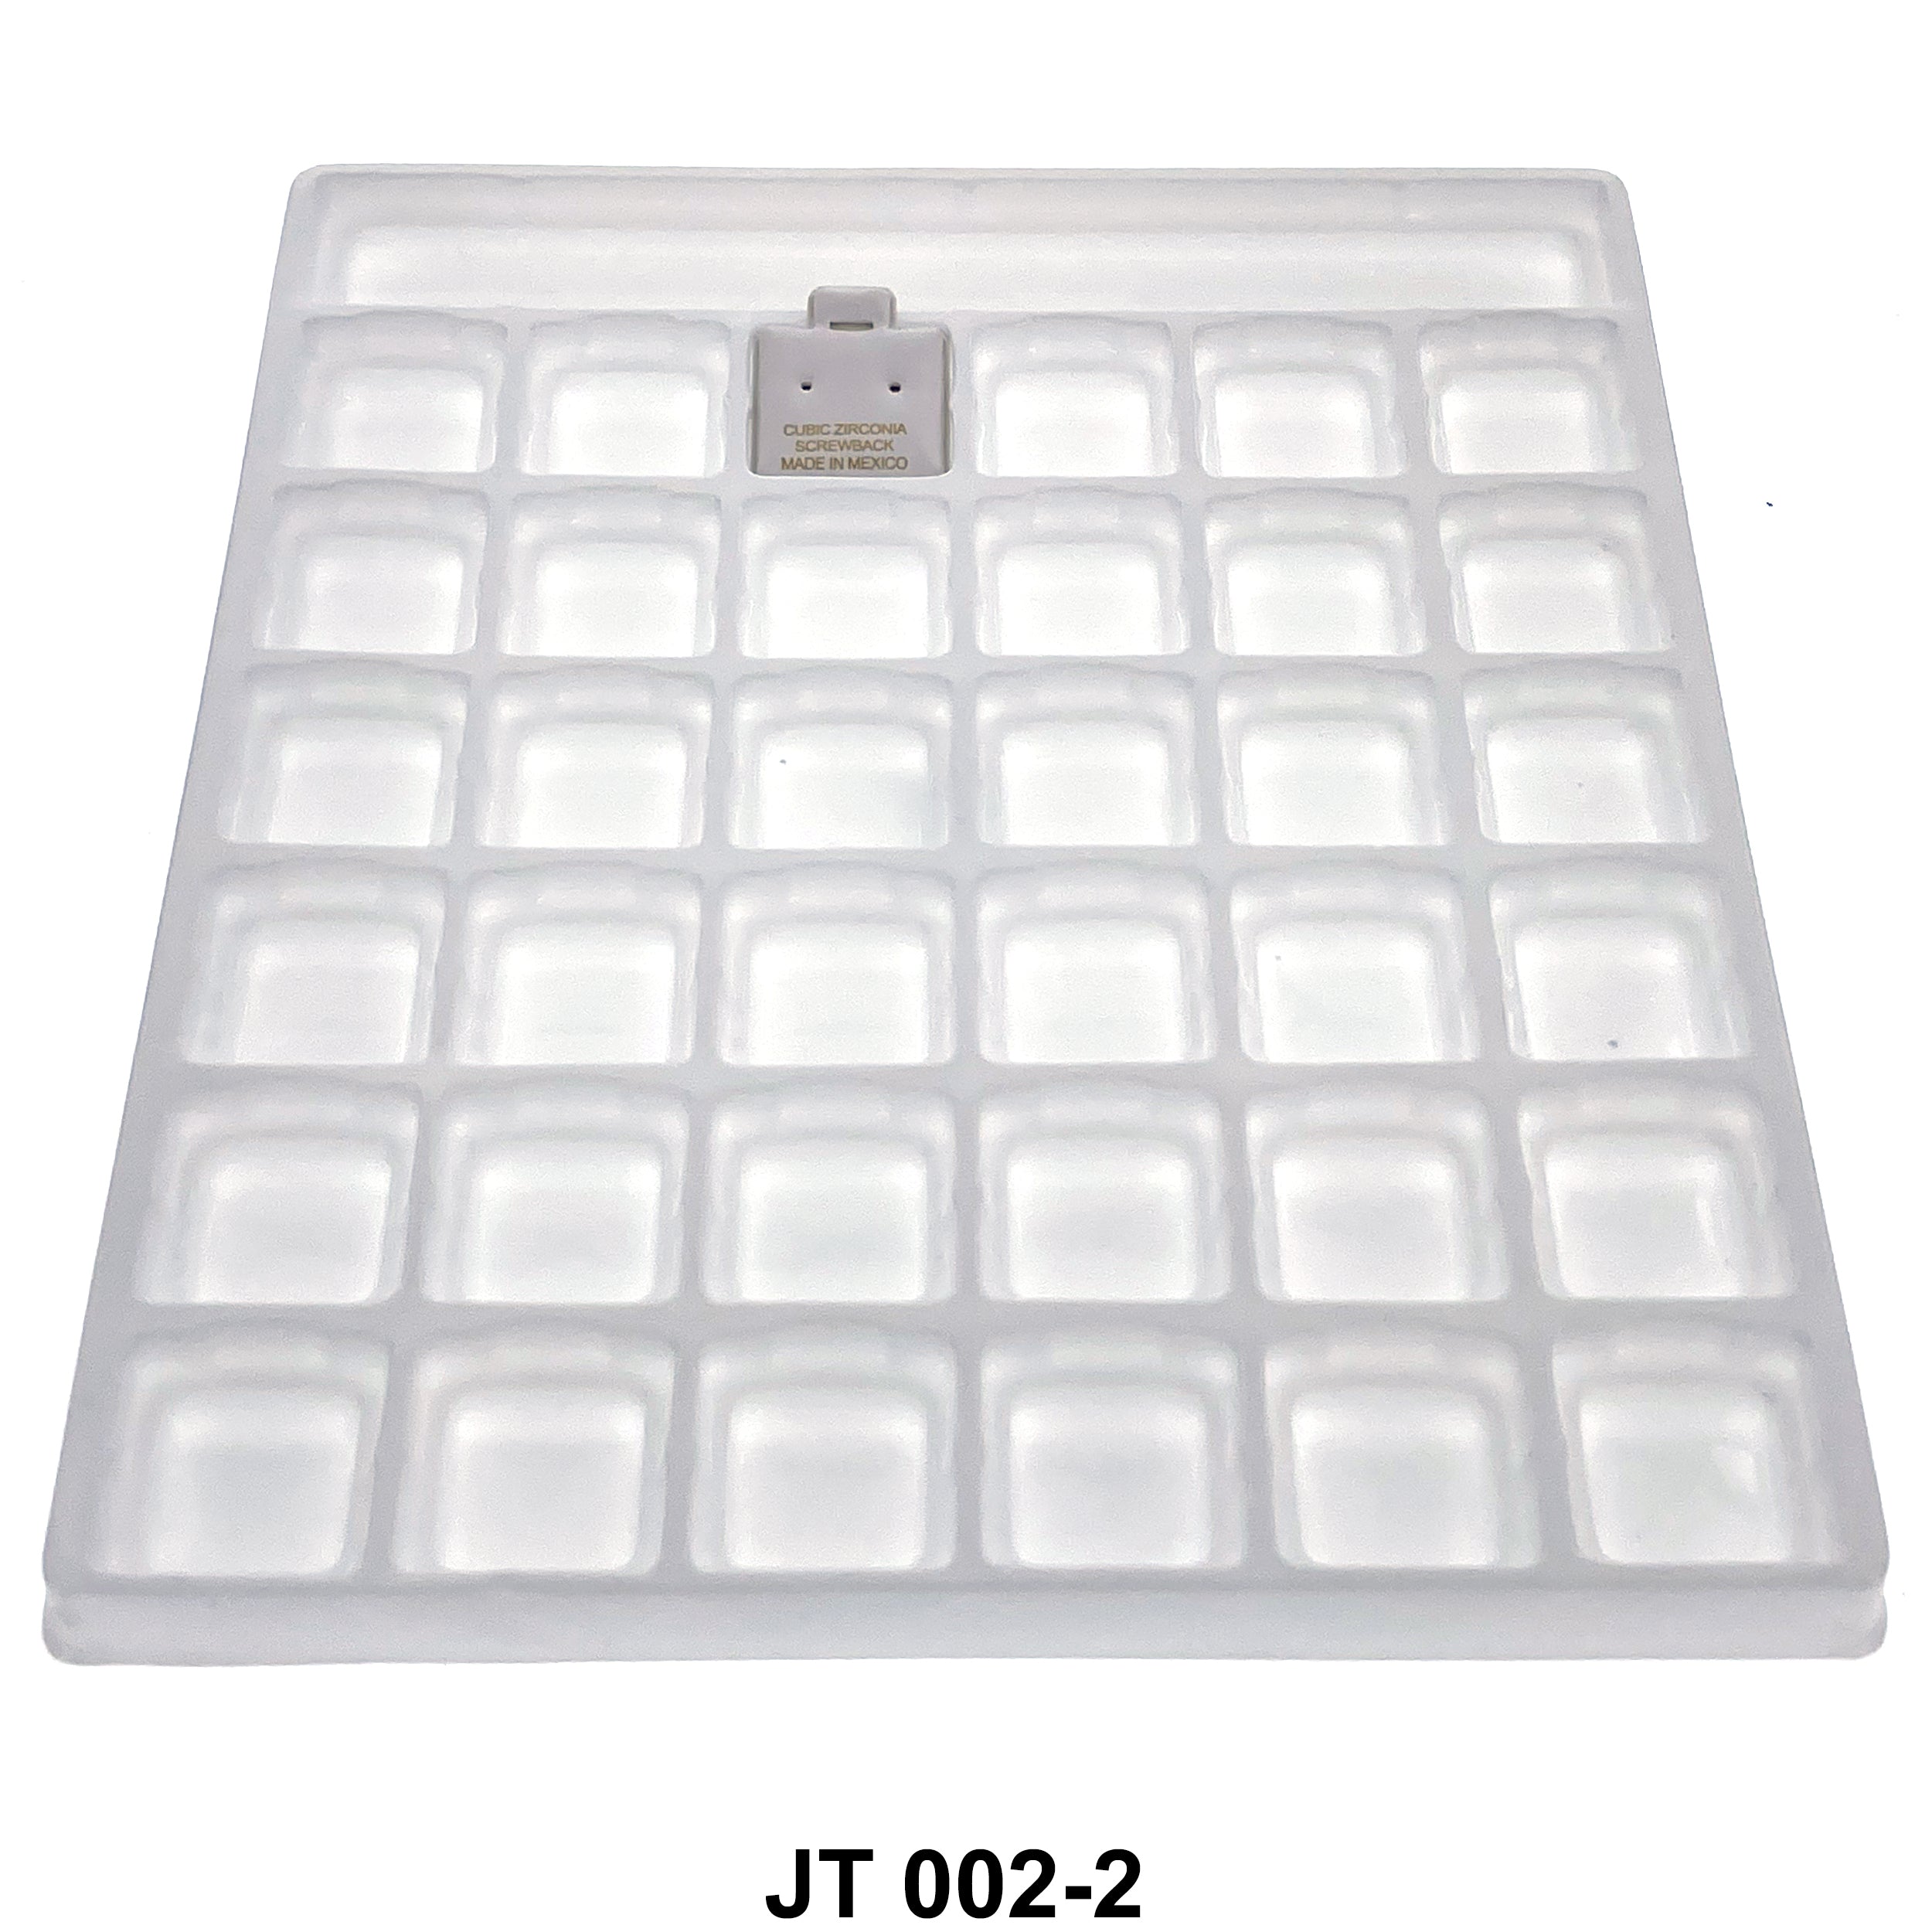 36 Square Cards Tray JT 002-2